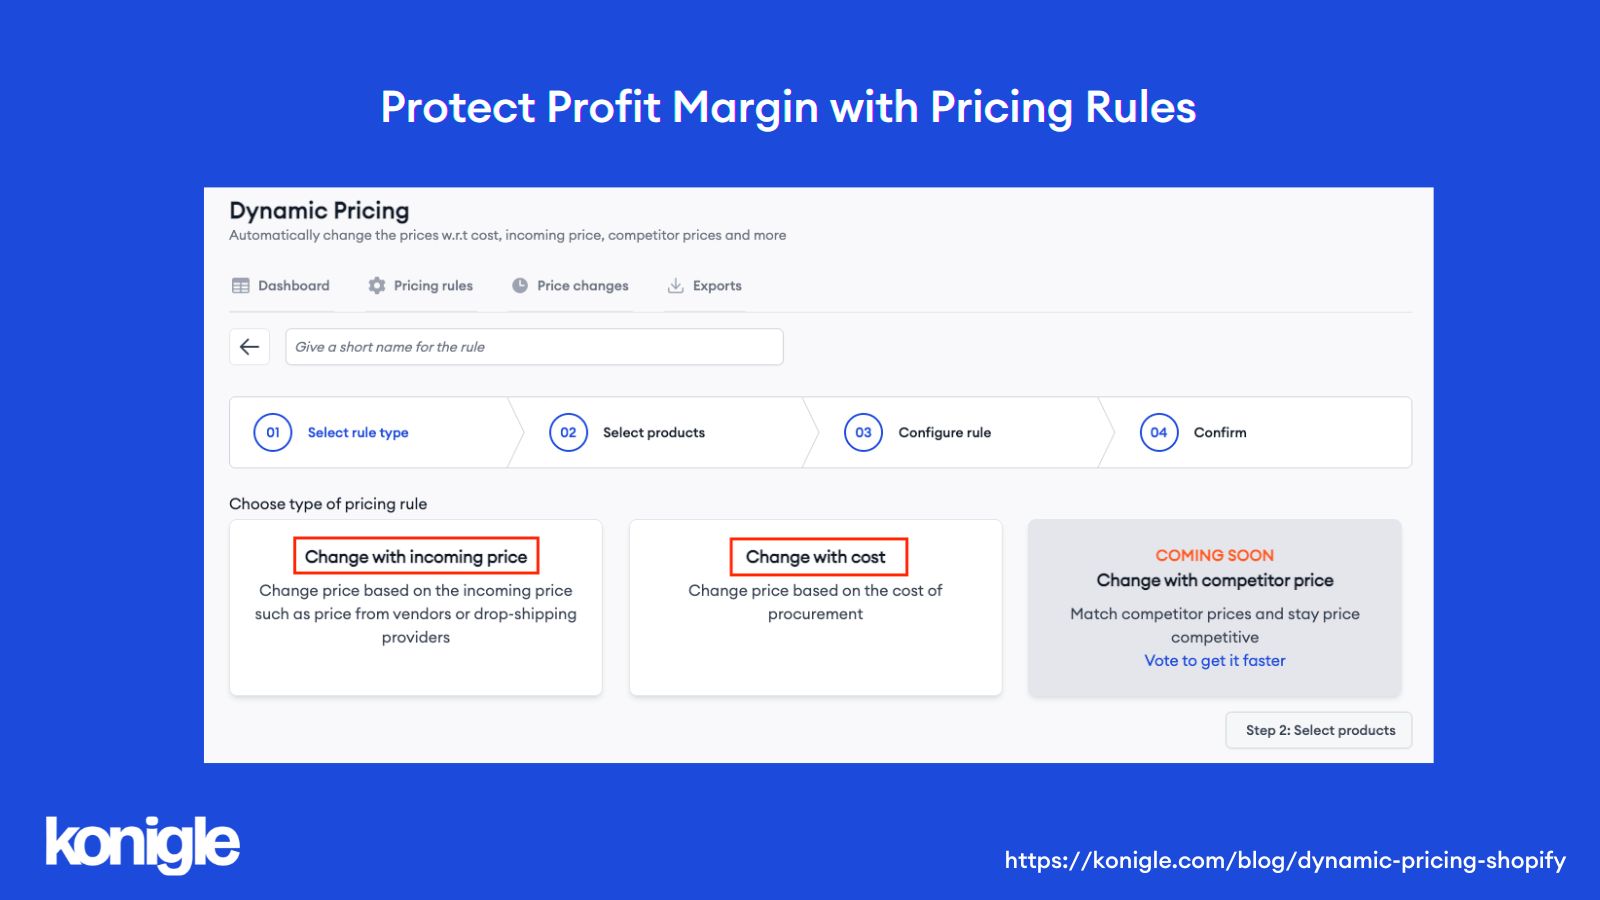 Konigle’s Dynamic Pricing tool helps preserve your profit margin by automatically setting prices when there are changes to costs.